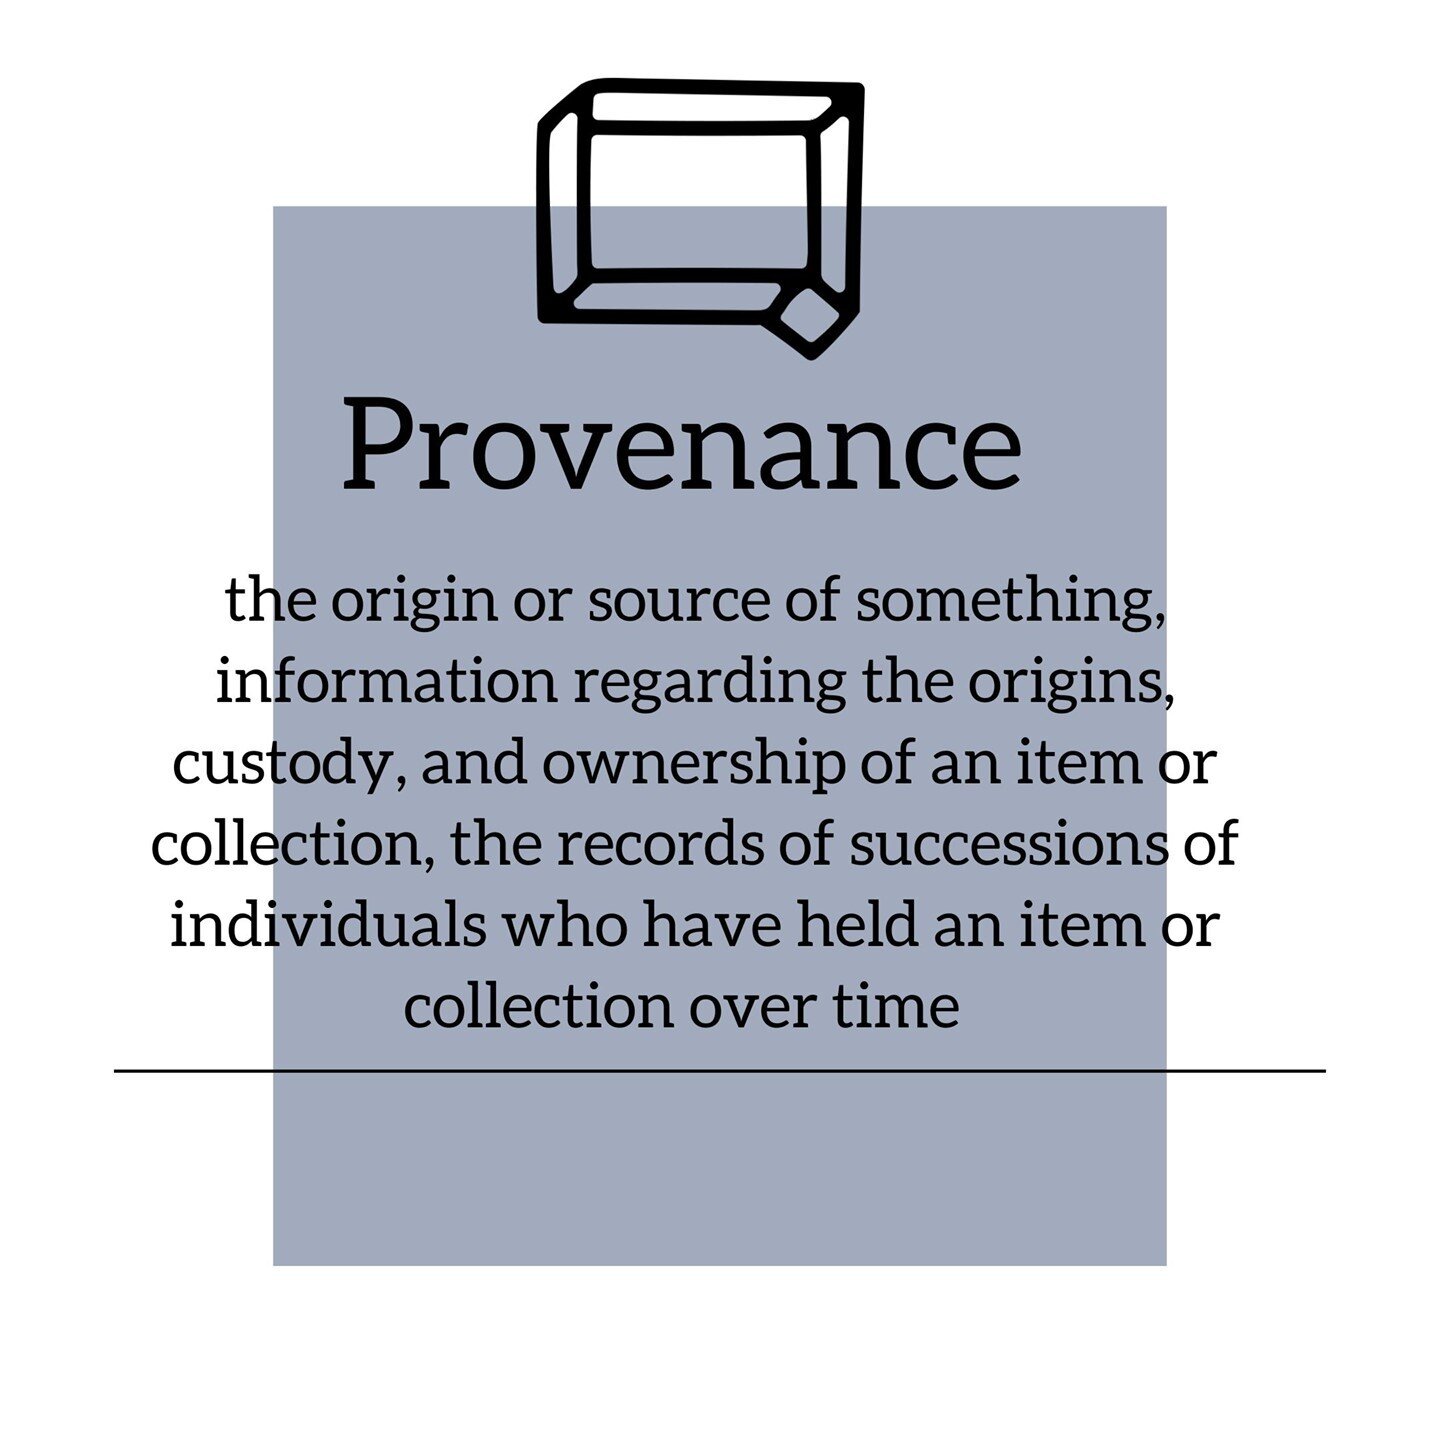 Provenance: the origin or source of something,⁠
information regarding the origins, custody, and ownership of an item or collection, the records of successions of individuals who have held an item or collection over time⁠
(image description - the abov